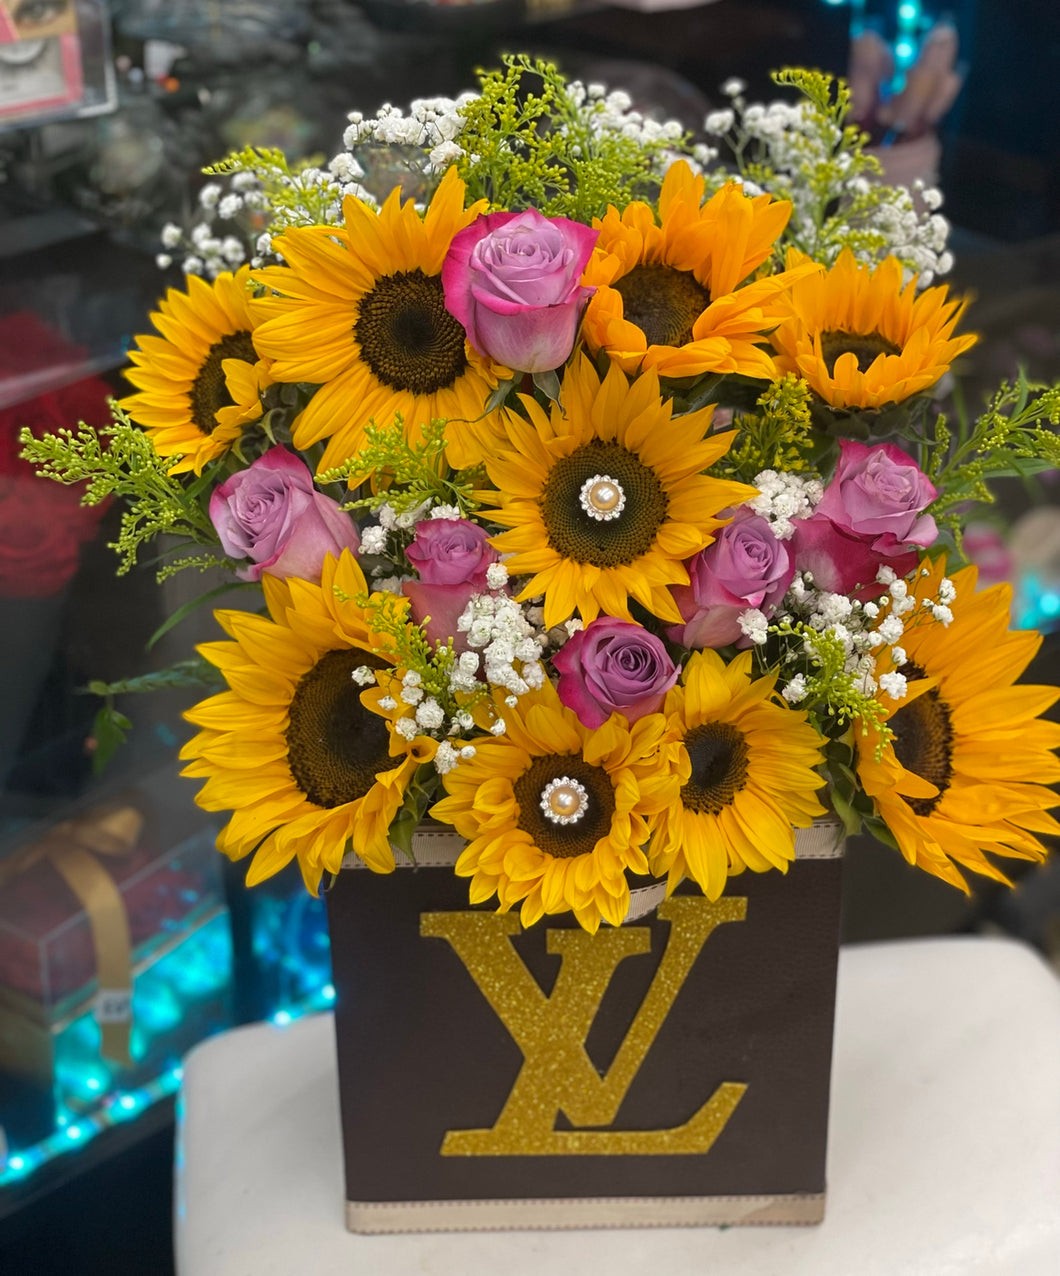 LV box or channel with roses and sunflowers